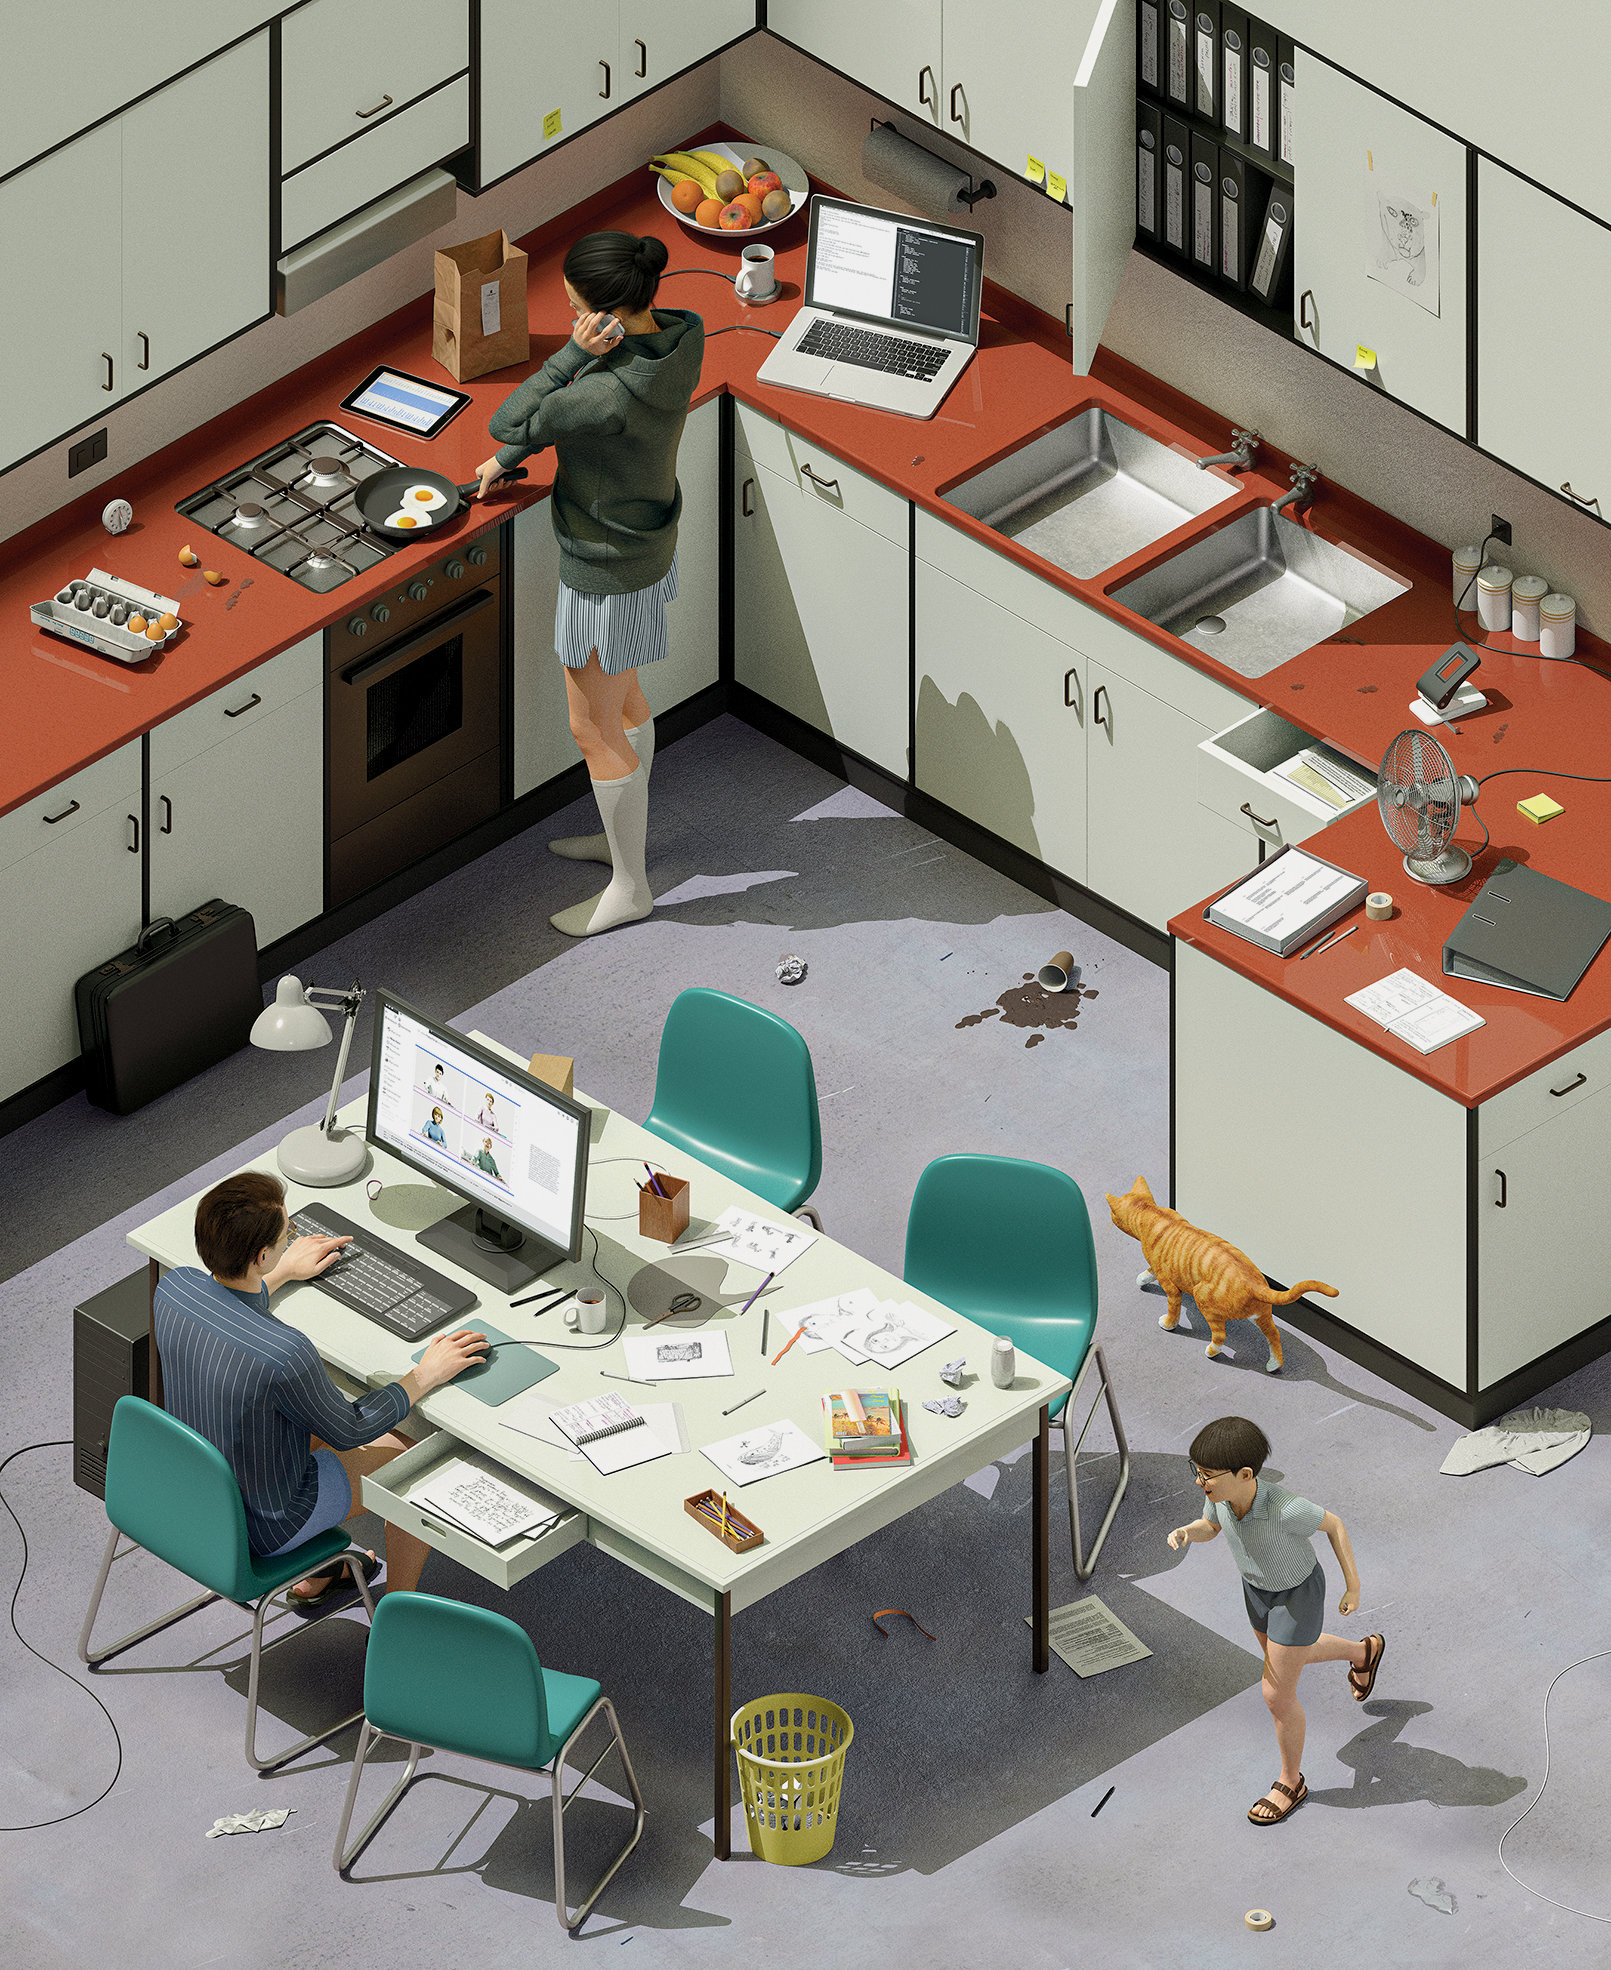 Kitchen - New York Times Josh Harcus - What If Working From Home Goes on … Forever?  Illustration by Max Guther